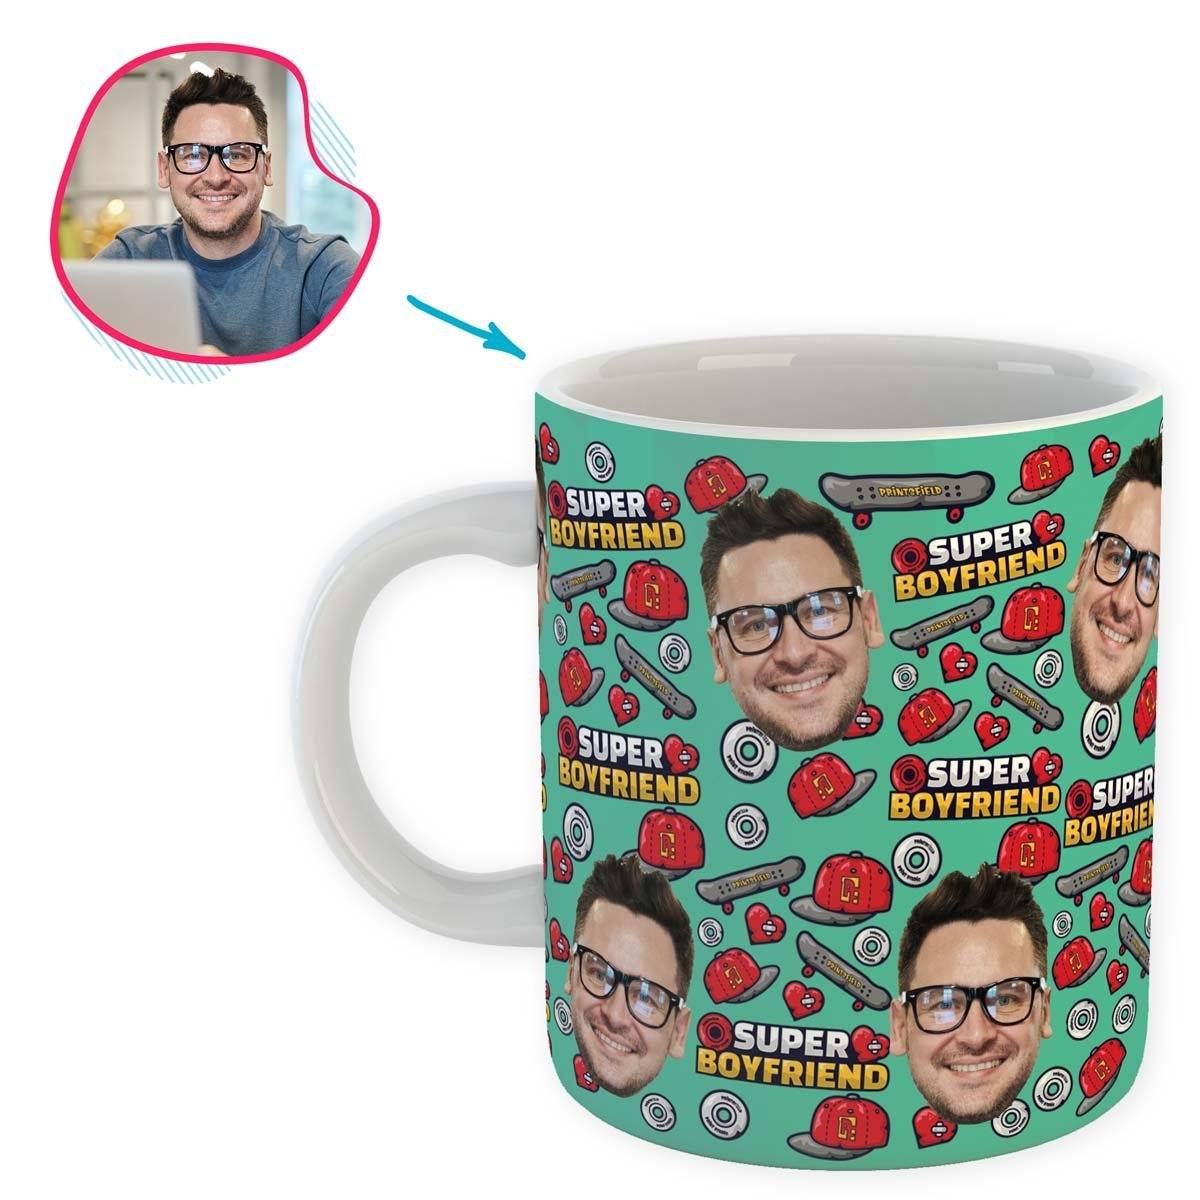 Mint Boyfriend personalized mug with photo of face printed on it